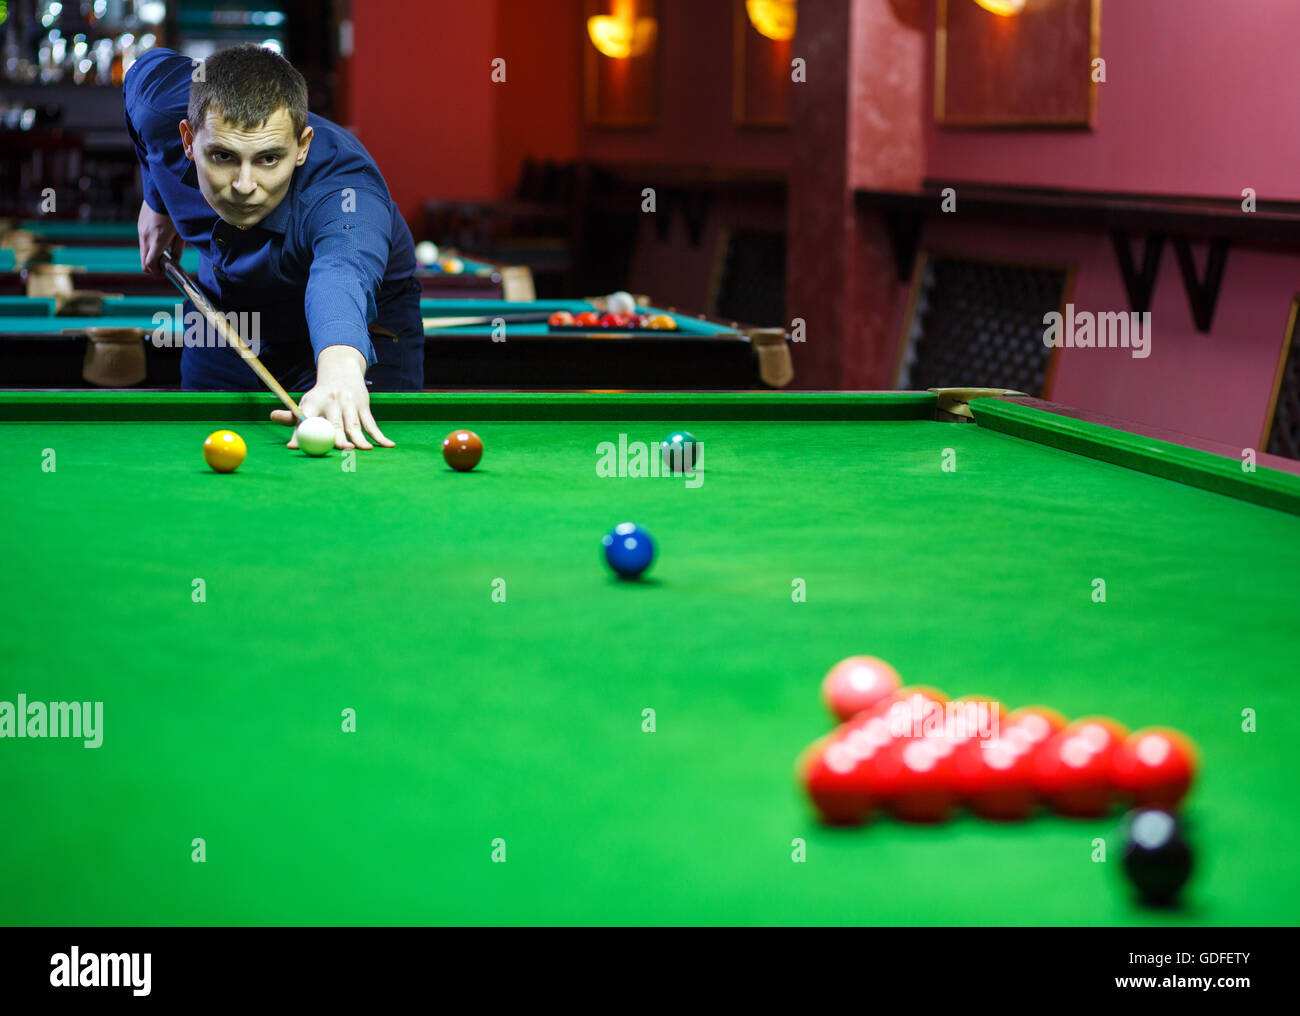 Ball and Snooker Player Stock Photo